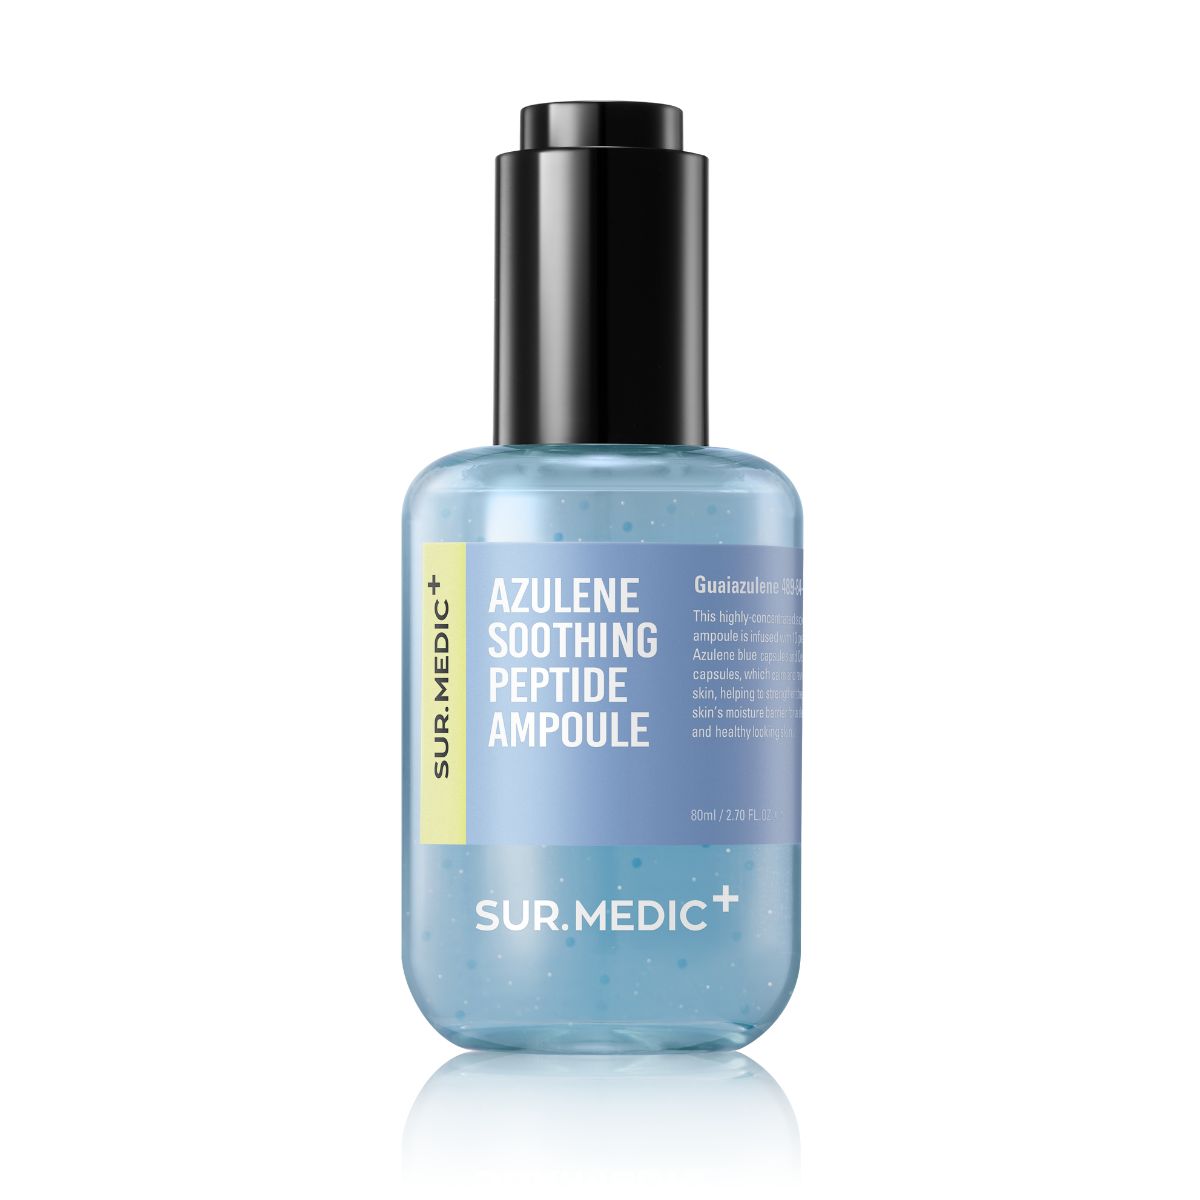 SUR.MEDIC AZULENE SOOTHING PEPTIDE AMPOULE 80ml - skin care